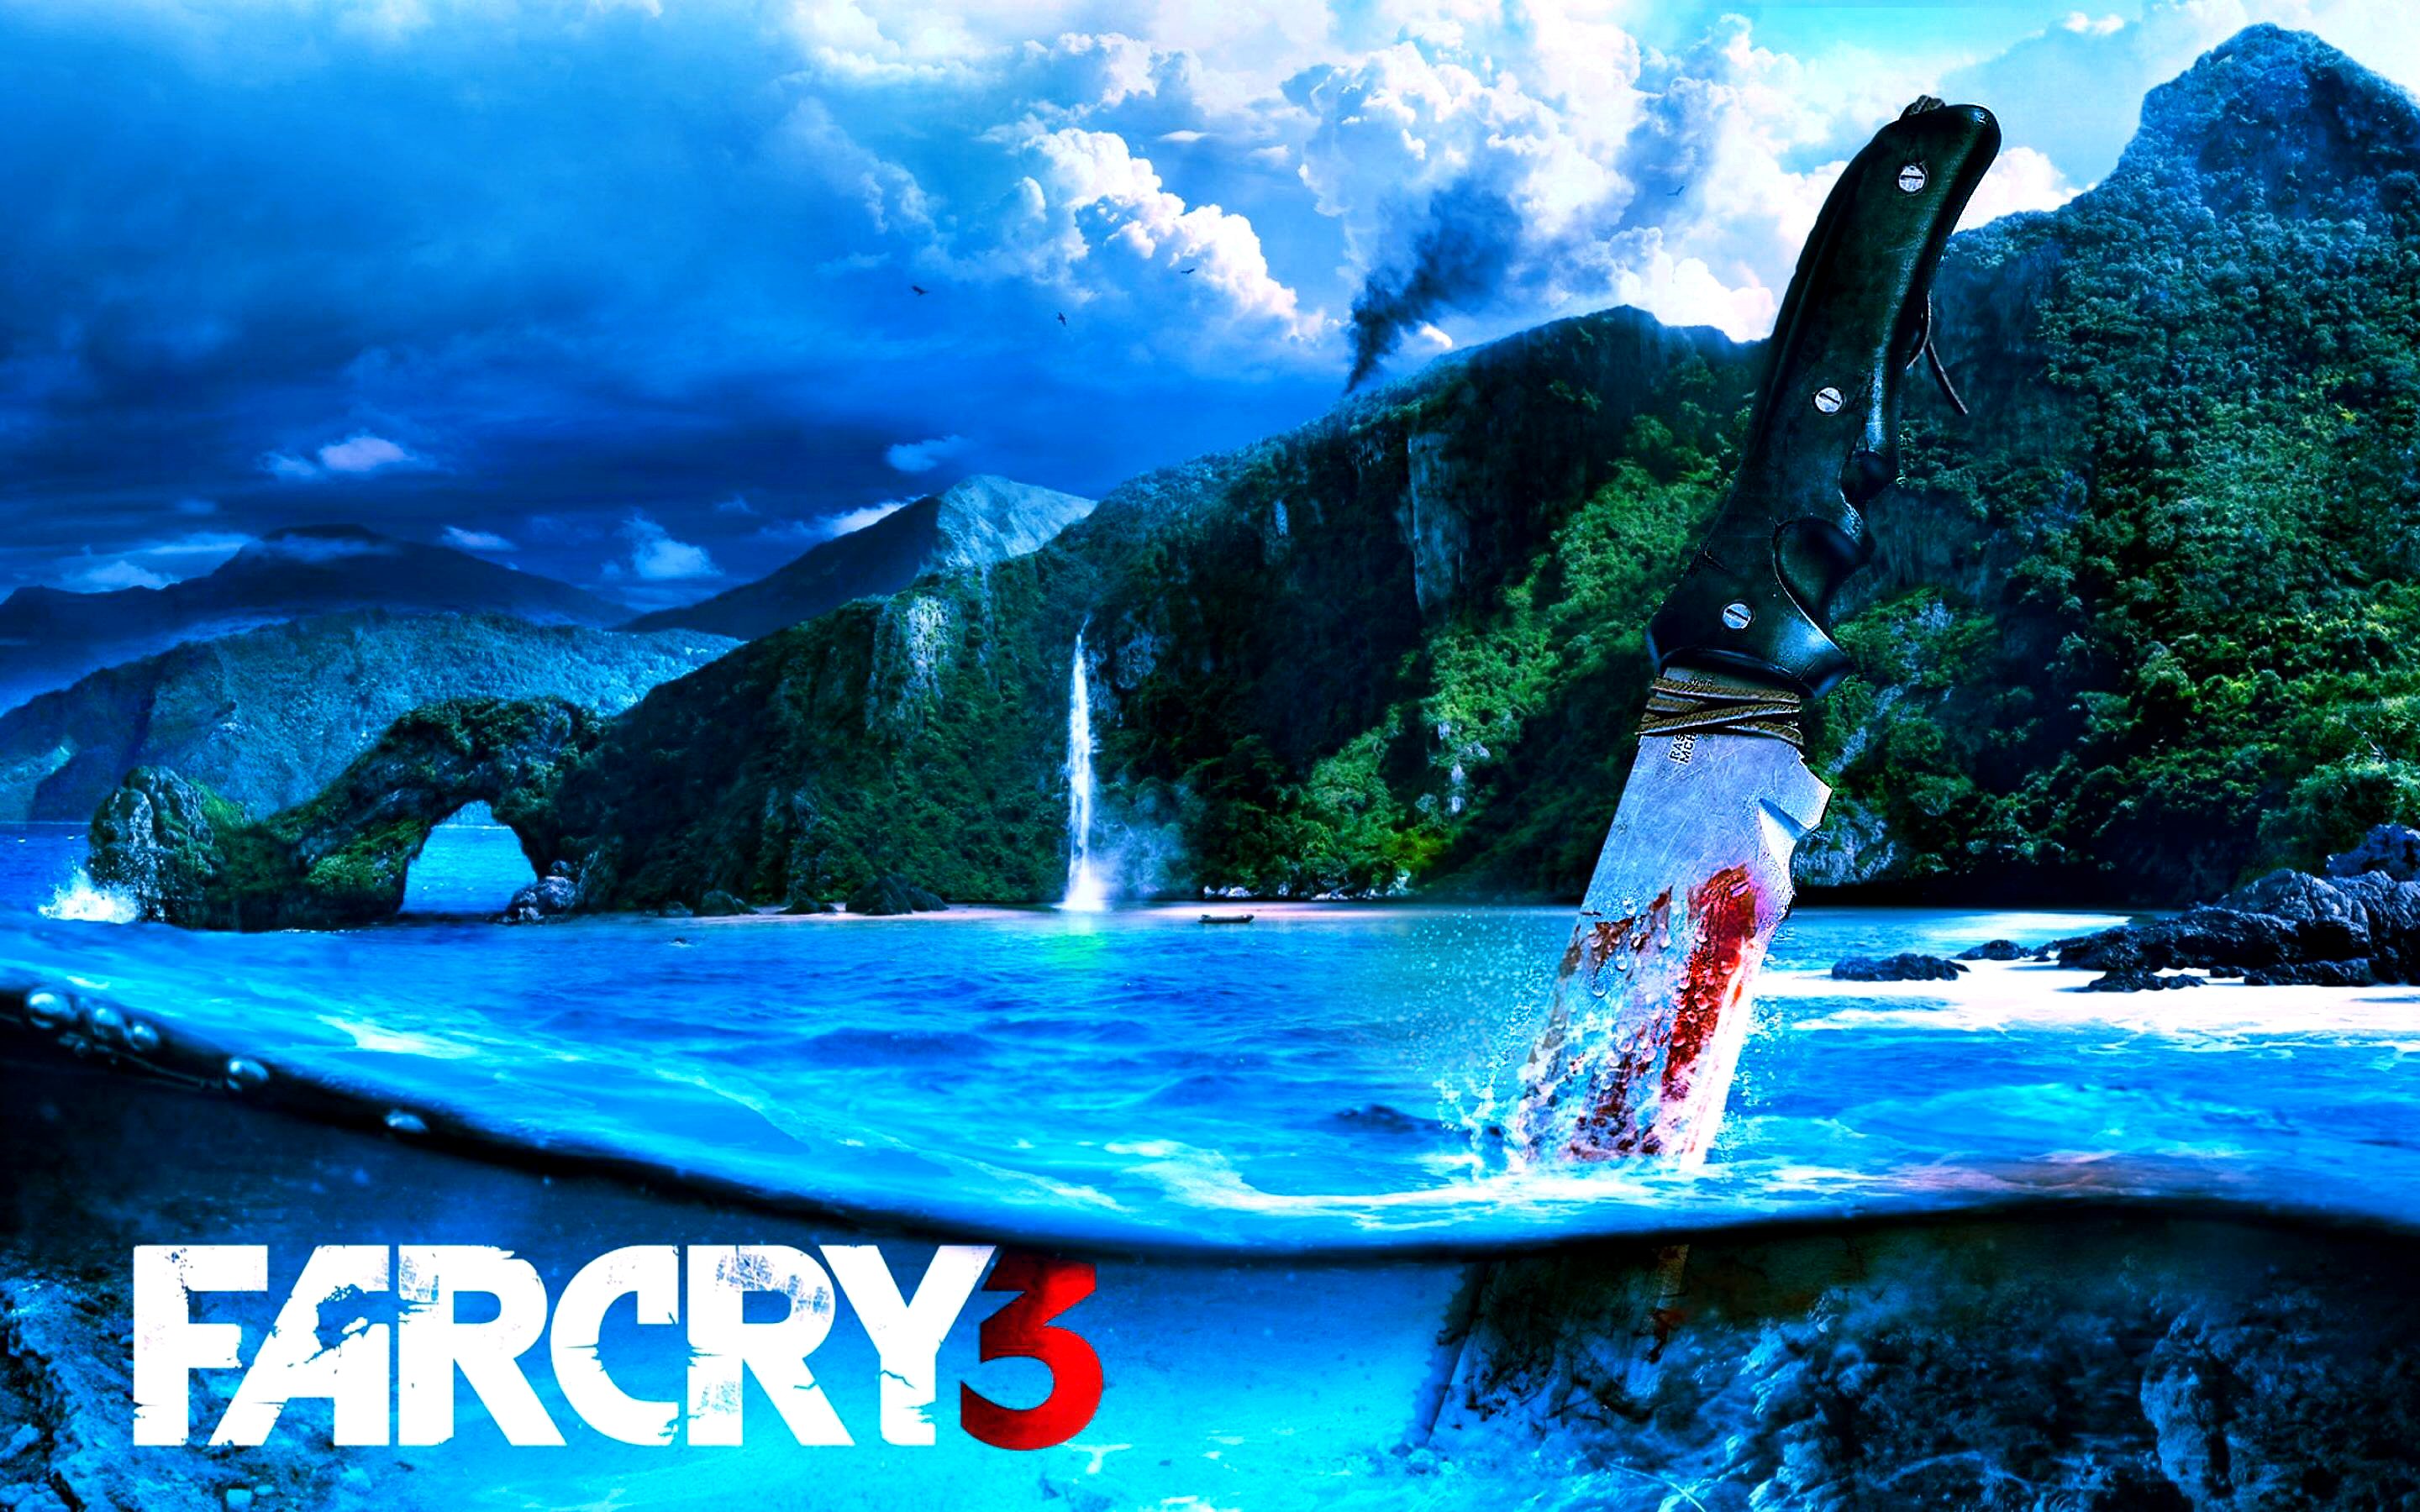 water, tropical, mountain, video game, far cry 3, cloud, far cry, knife, turquoise images